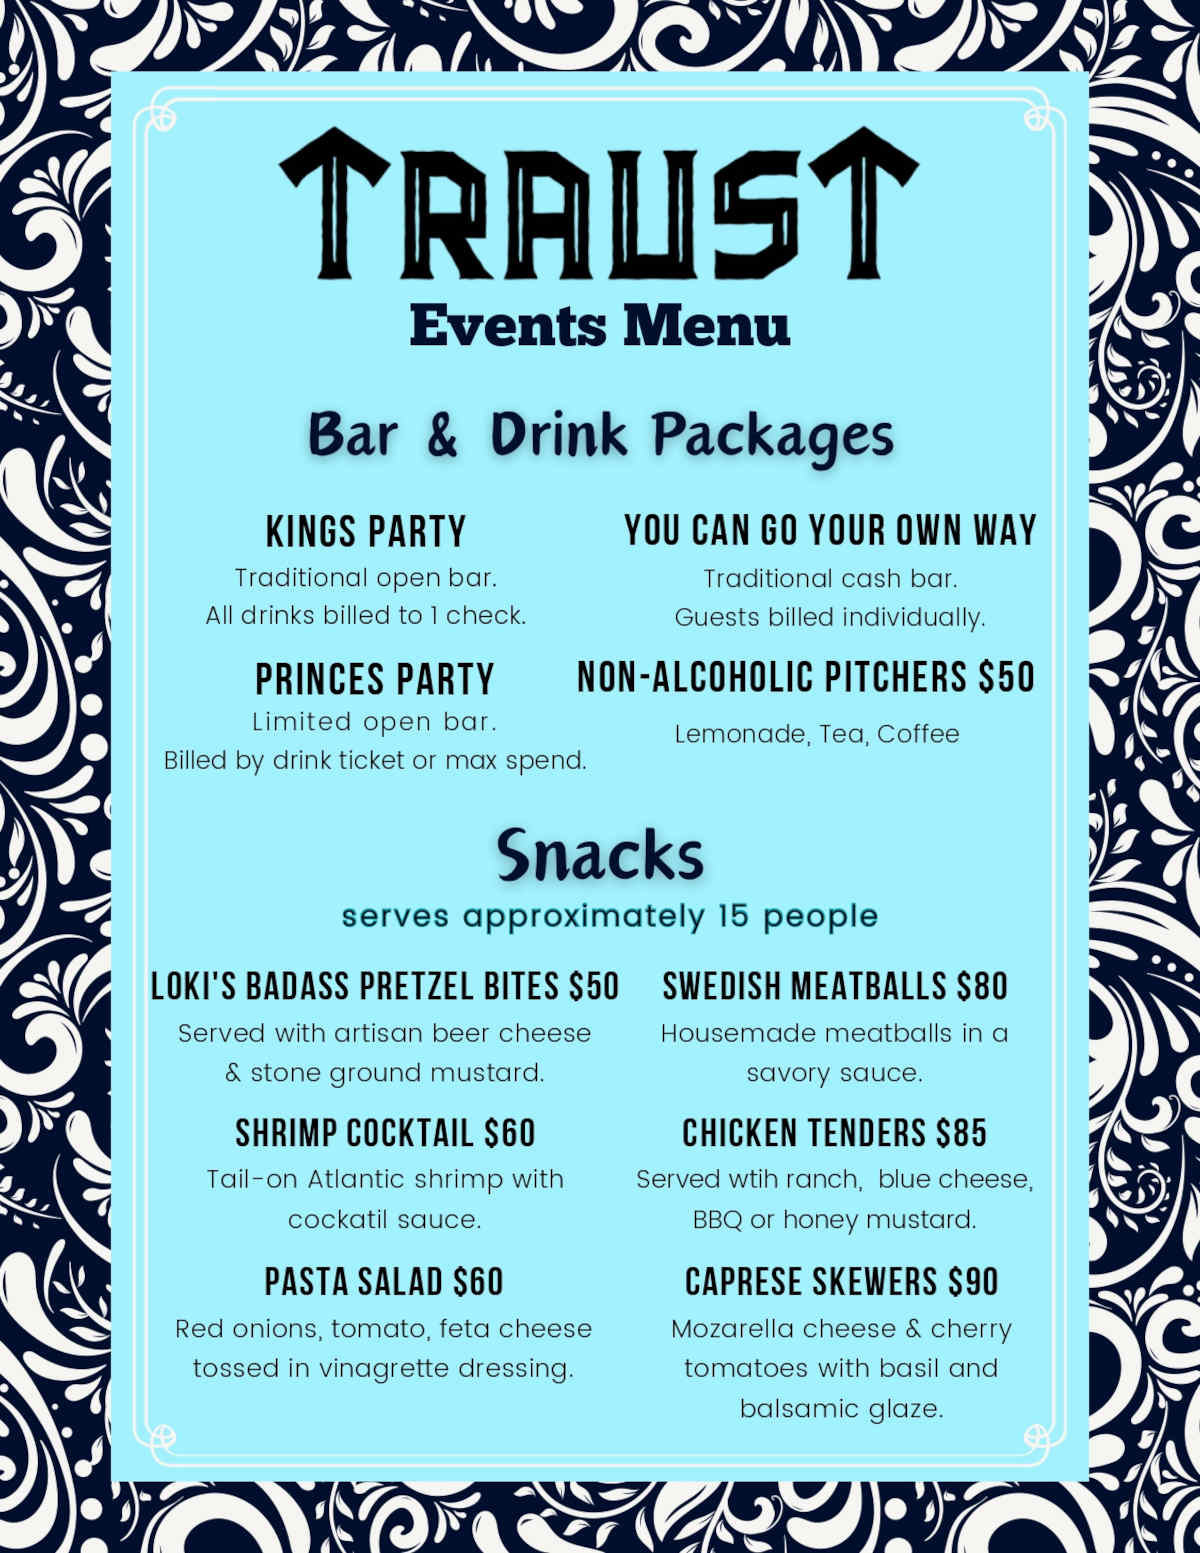 Traust events menu drink packages and snacks